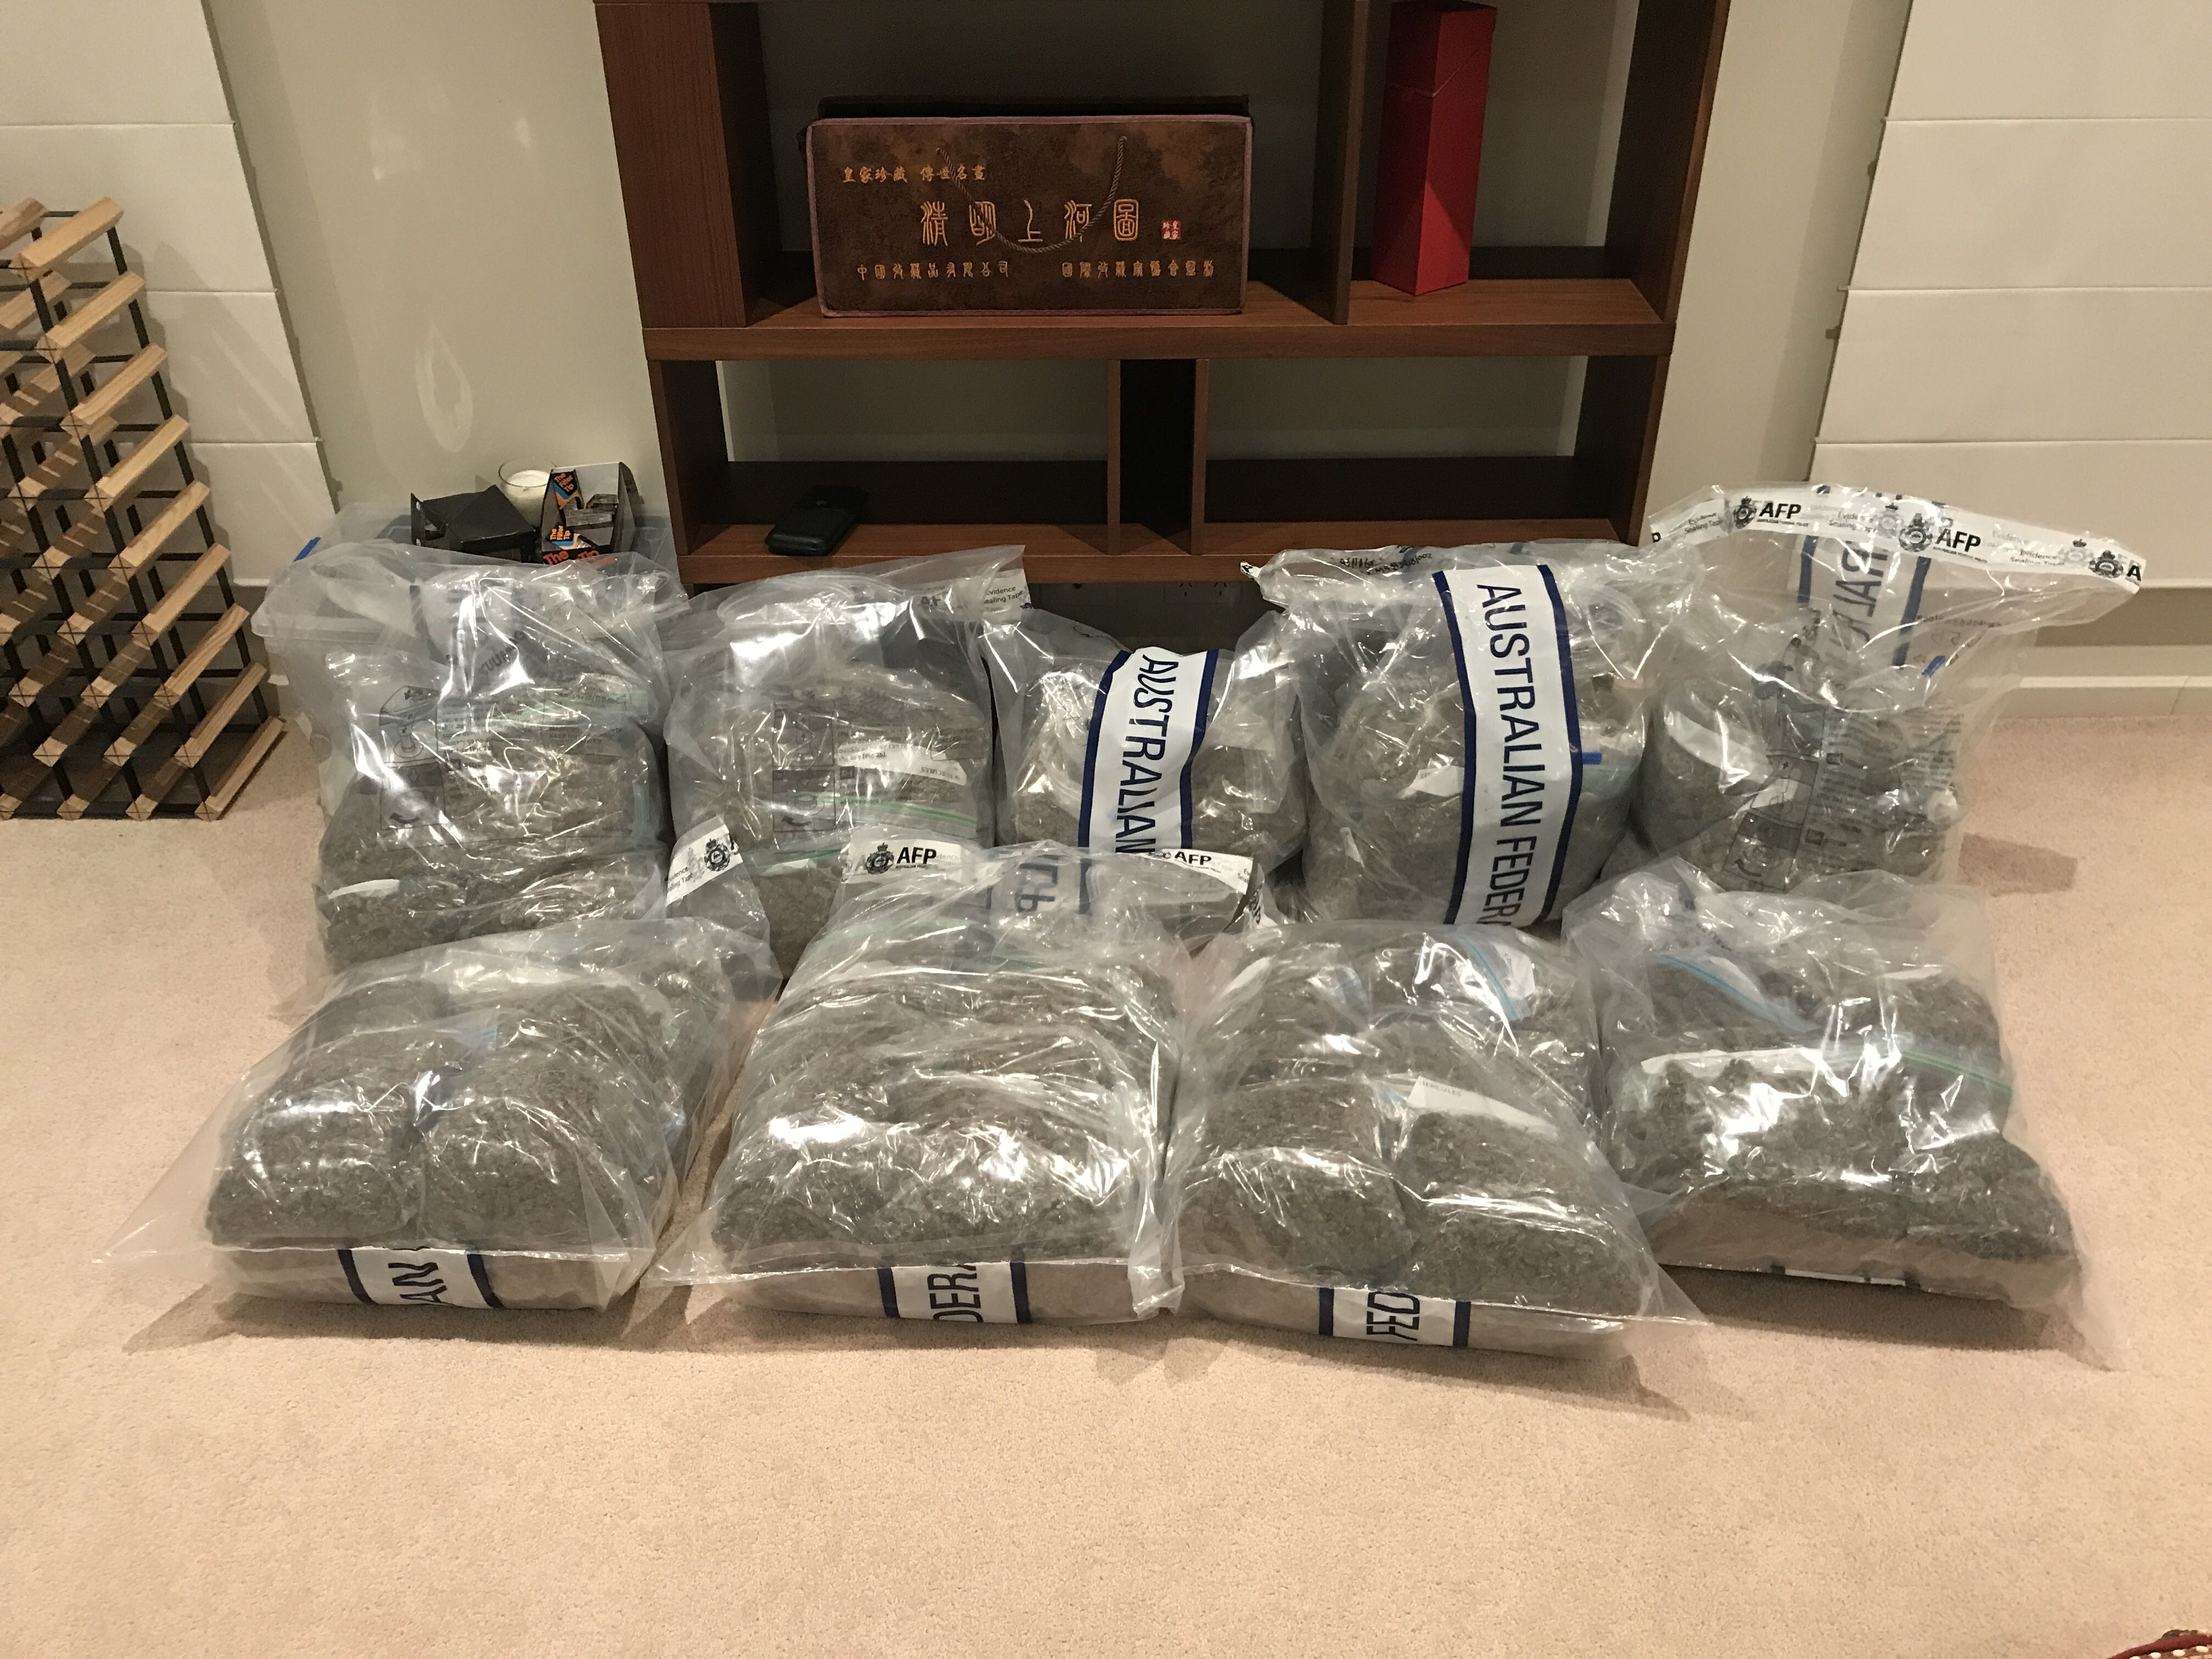 Police seize 43 kg of cannabis and cash after raids in Palmerston and Yarralumla